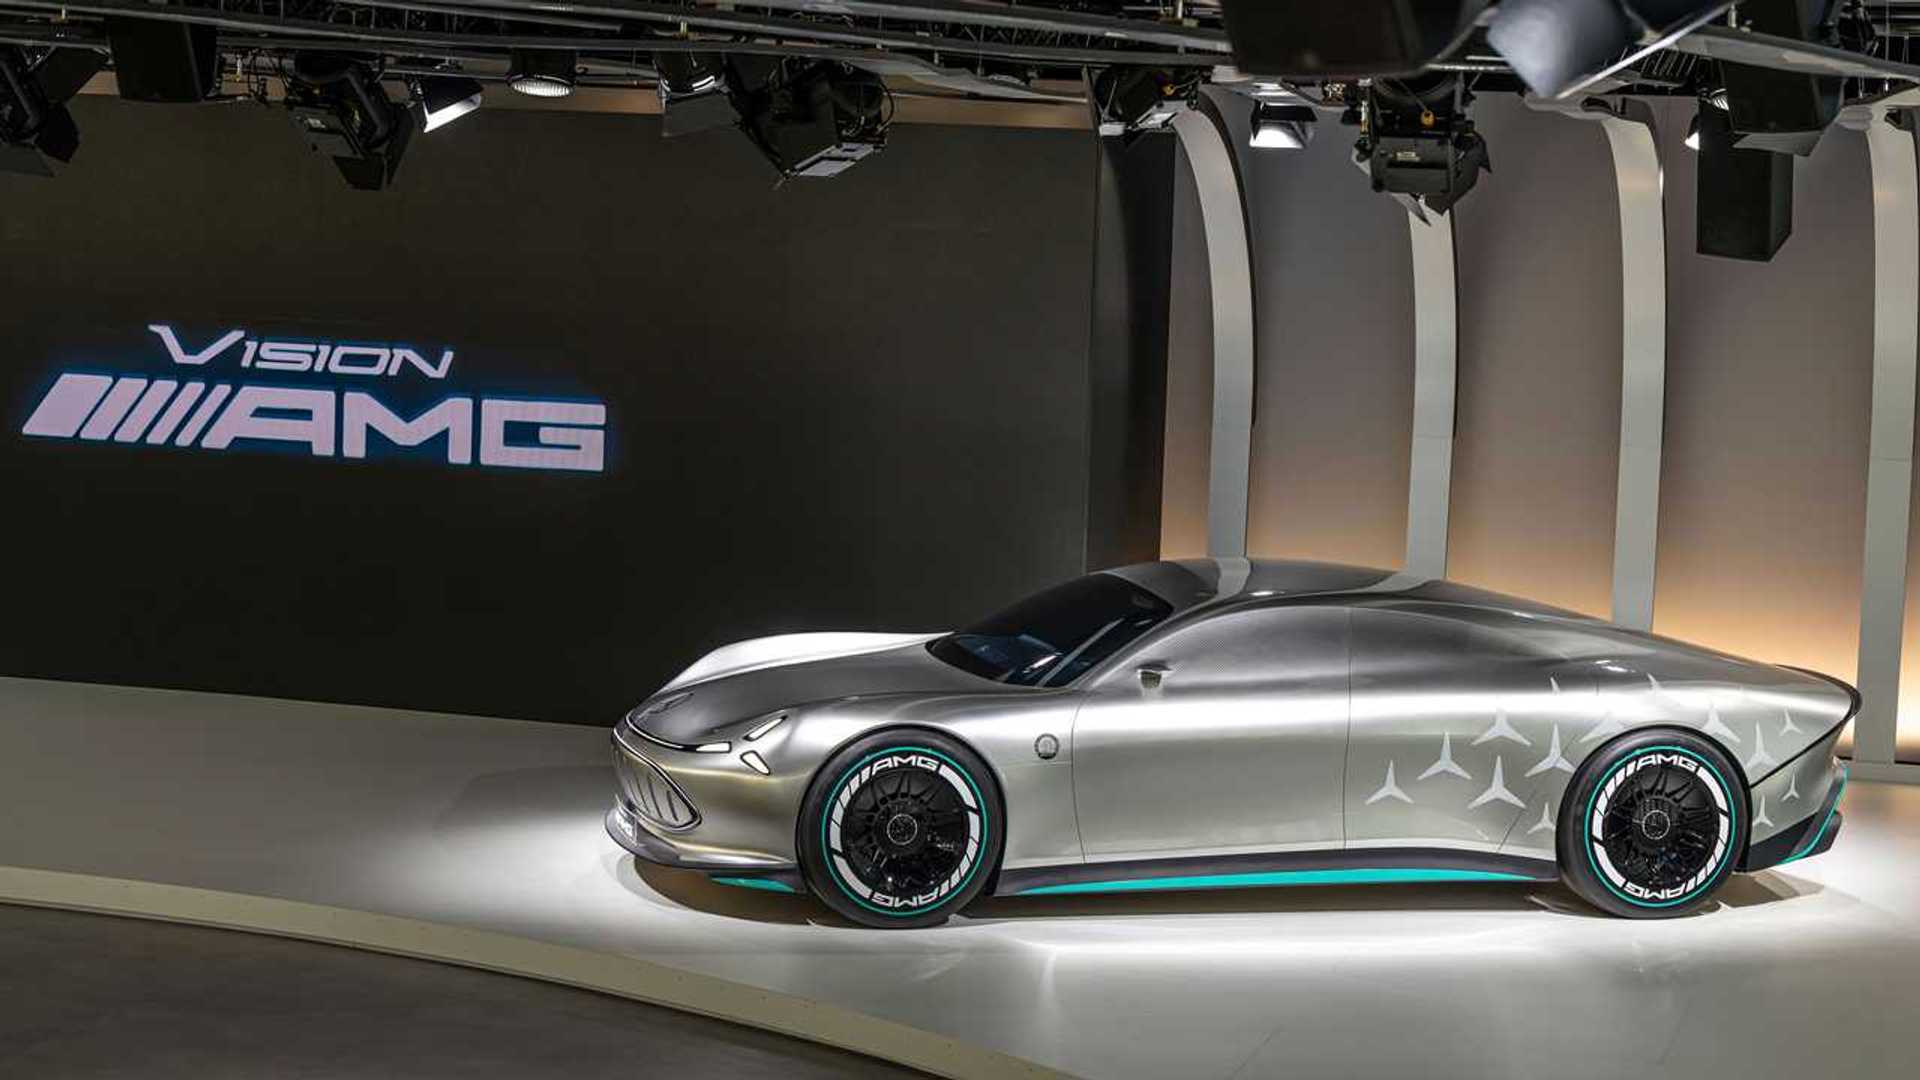 AMG Eléctrico lateral